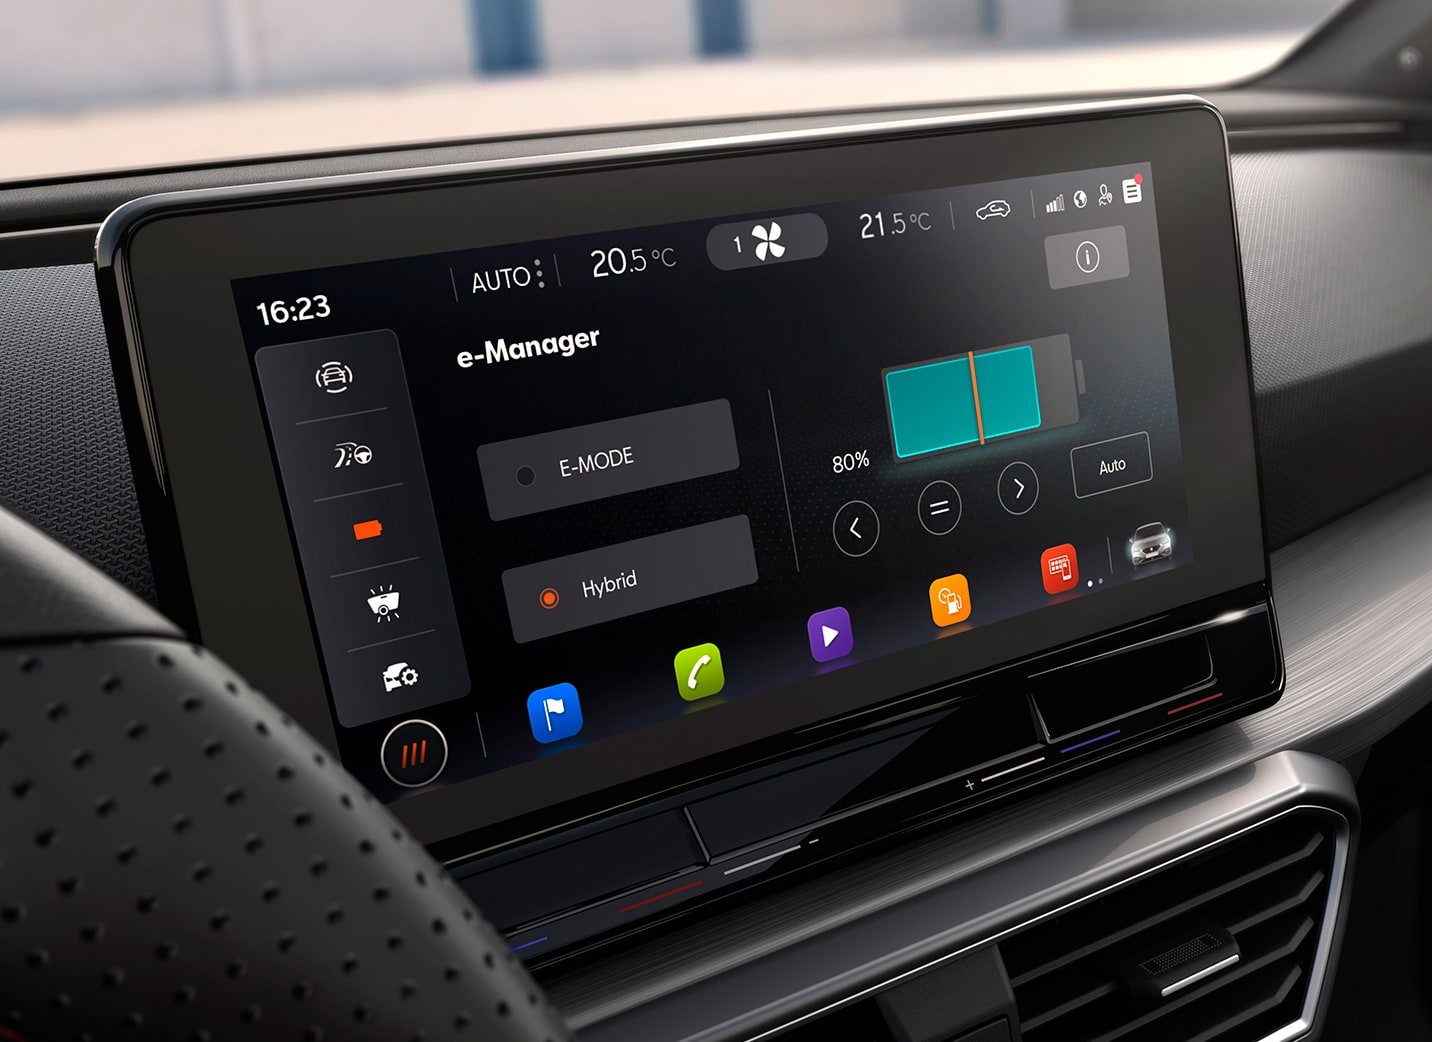 SEAT Leon 2020 eHybrid 10 inch navi system with phev screen detailed view